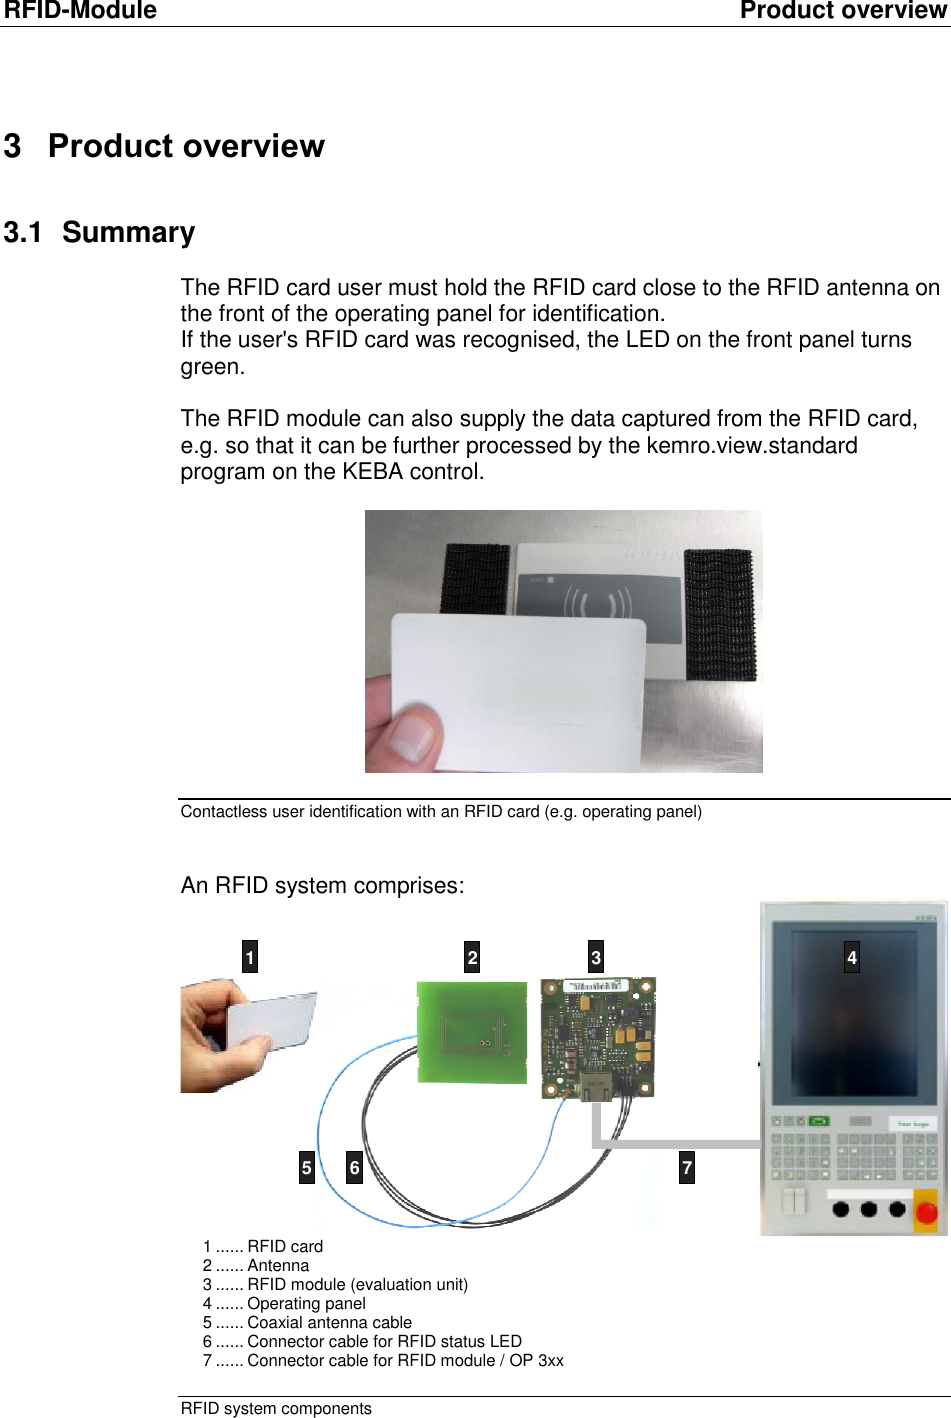 RFID-Module  Product overview 3  Product overview 3.1  Summary The RFID card user must hold the RFID card close to the RFID antenna on the front of the operating panel for identification. If the user&apos;s RFID card was recognised, the LED on the front panel turns green.   The RFID module can also supply the data captured from the RFID card, e.g. so that it can be further processed by the kemro.view.standard program on the KEBA control.   Contactless user identification with an RFID card (e.g. operating panel)  An RFID system comprises:   1 ...... RFID card 2 ...... Antenna  3 ...... RFID module (evaluation unit) 4 ...... Operating panel 5 ...... Coaxial antenna cable 6 ...... Connector cable for RFID status LED 7 ...... Connector cable for RFID module / OP 3xx  RFID system components 5 6 71 2 3 45 6 7